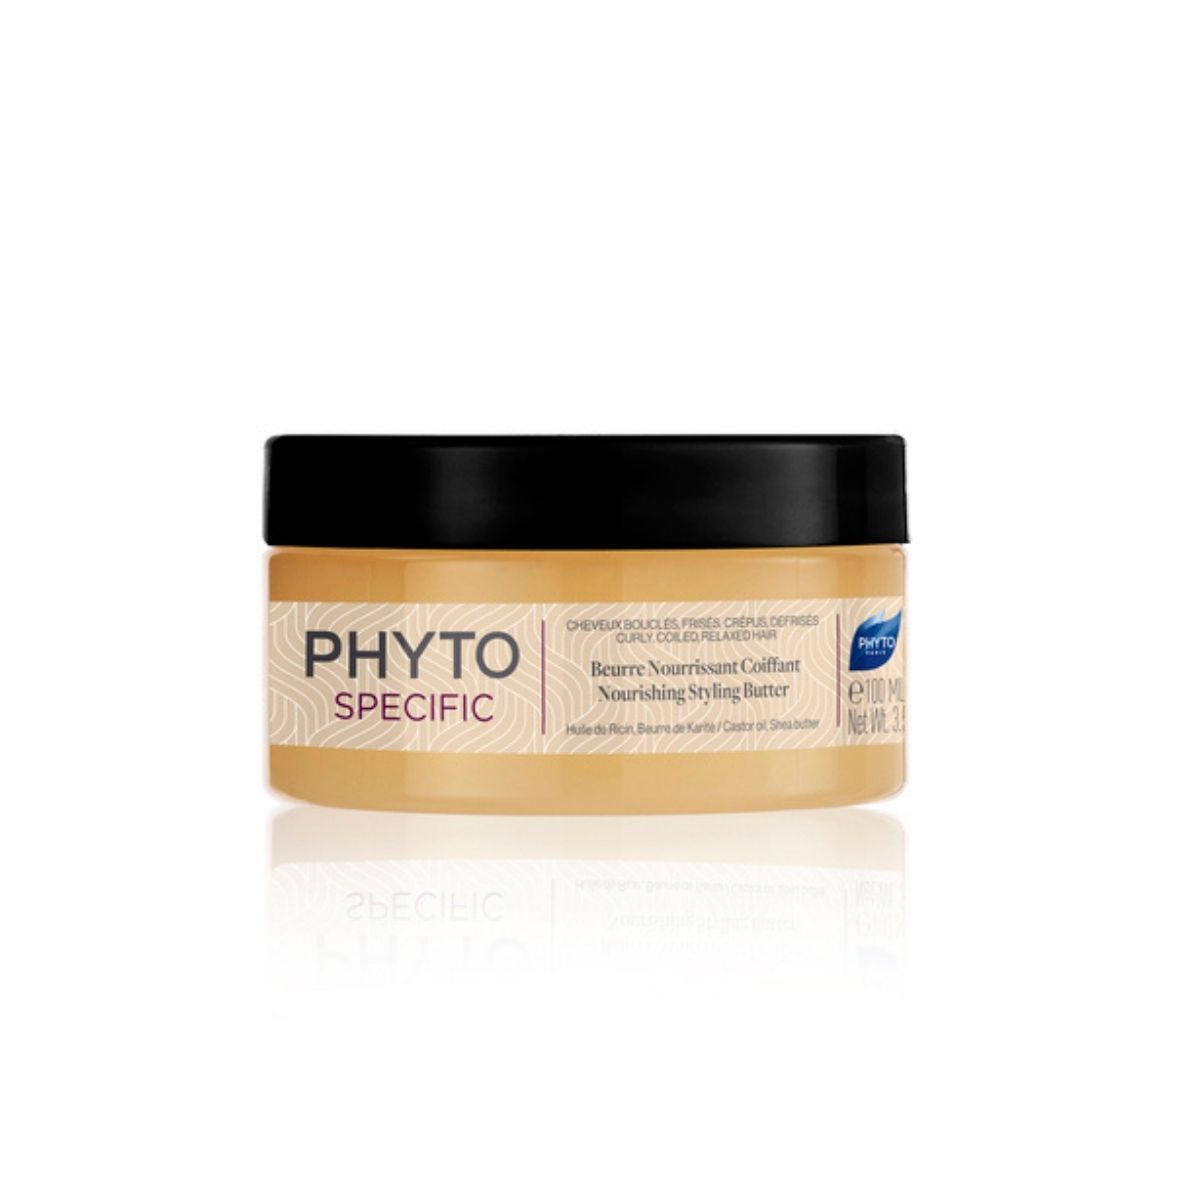 PHYTOSPECIFIC Nourishing Styling Butter